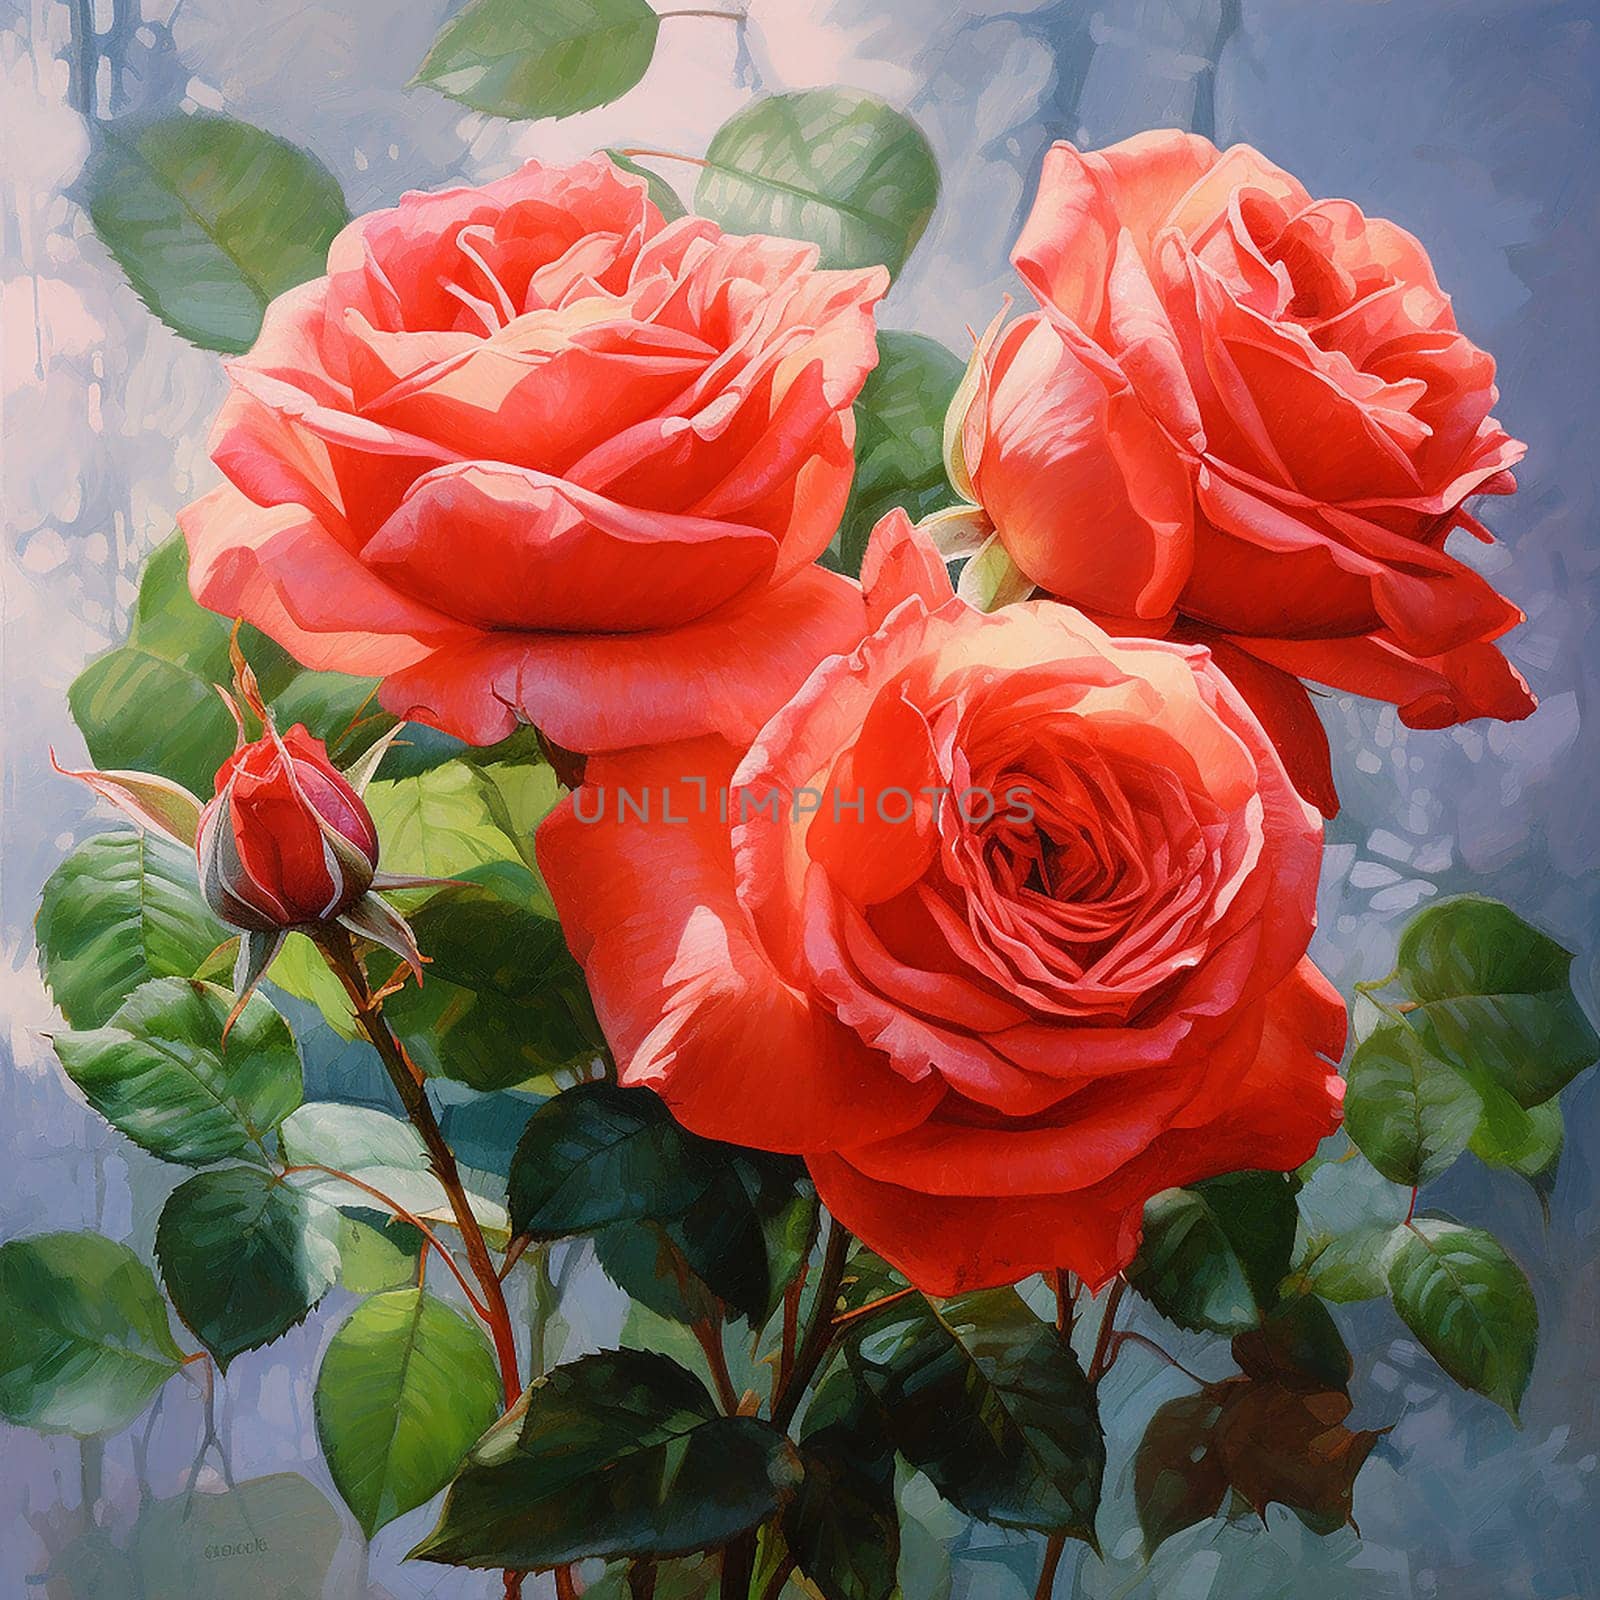 Vibrant red roses in full bloom against a light background by Hype2art